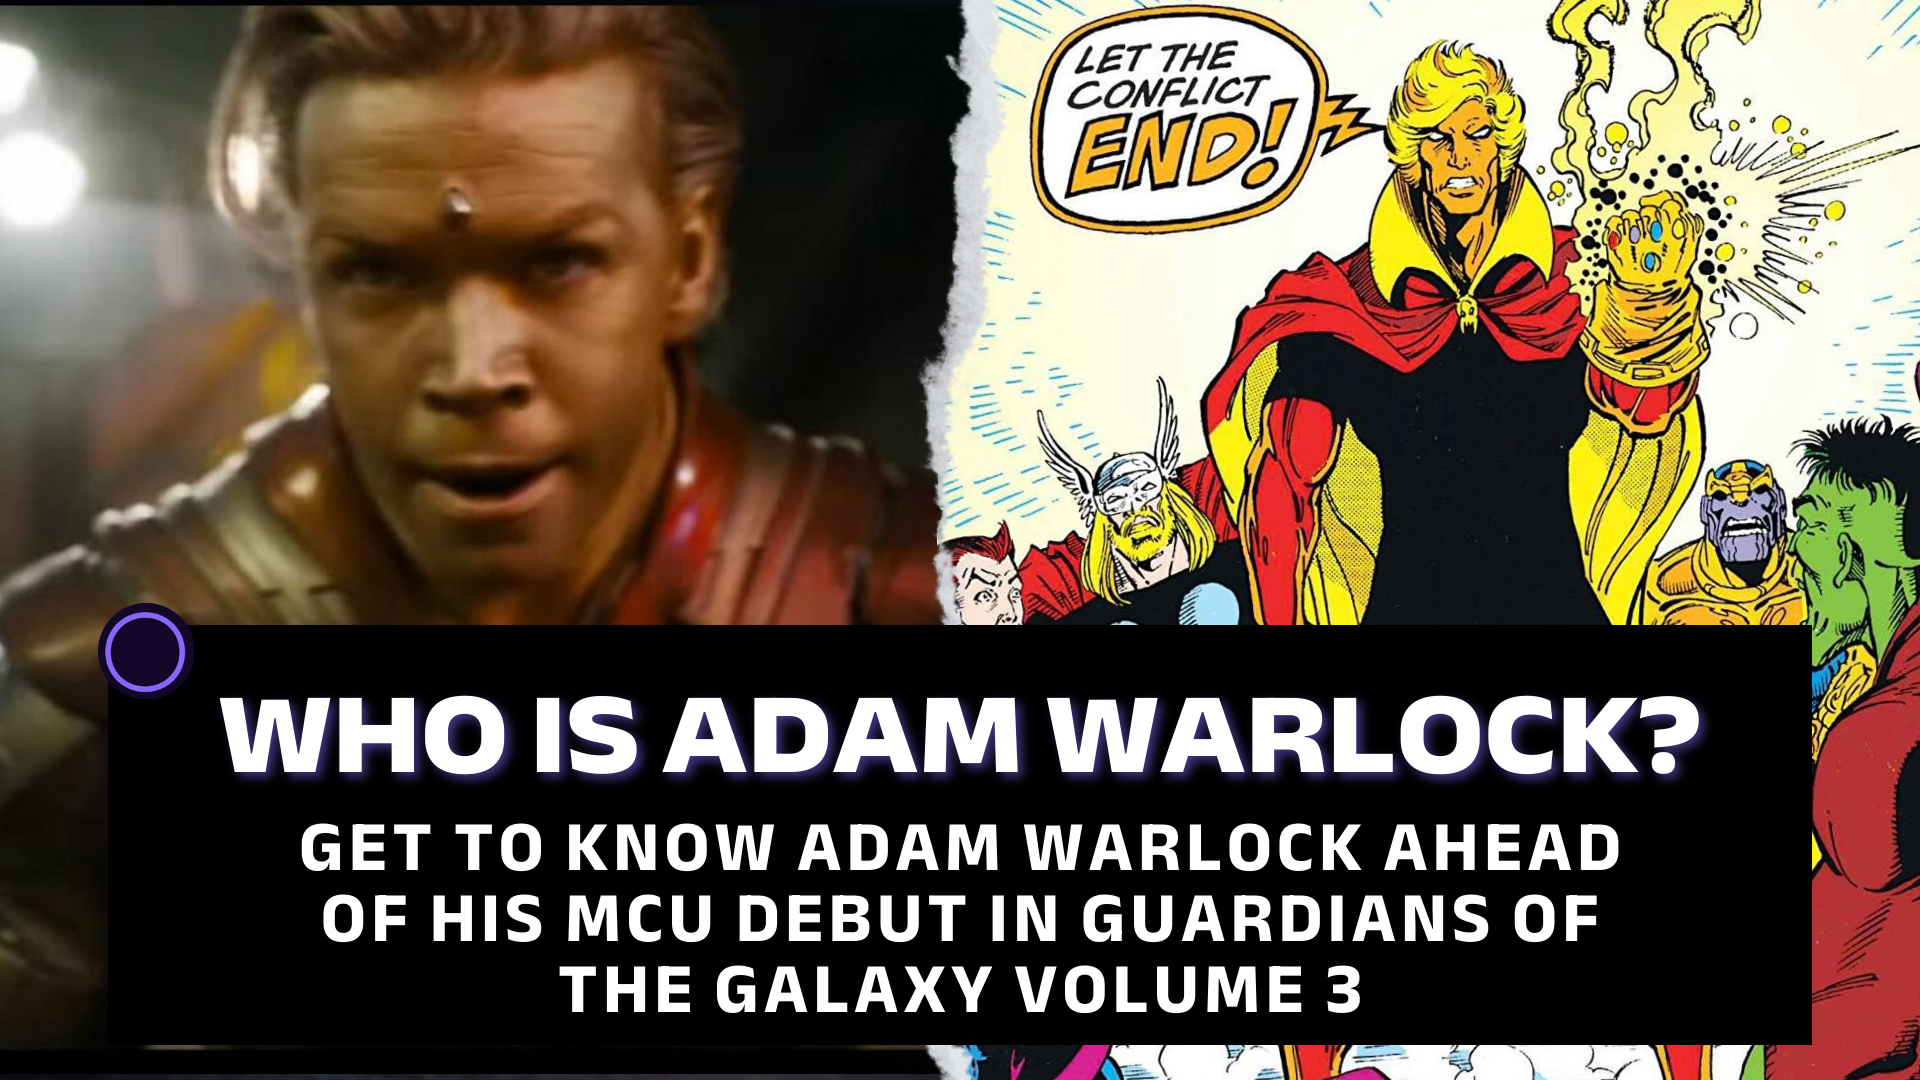 Image for Who is Adam Warlock in Guardians of the Galaxy Vol. 3?